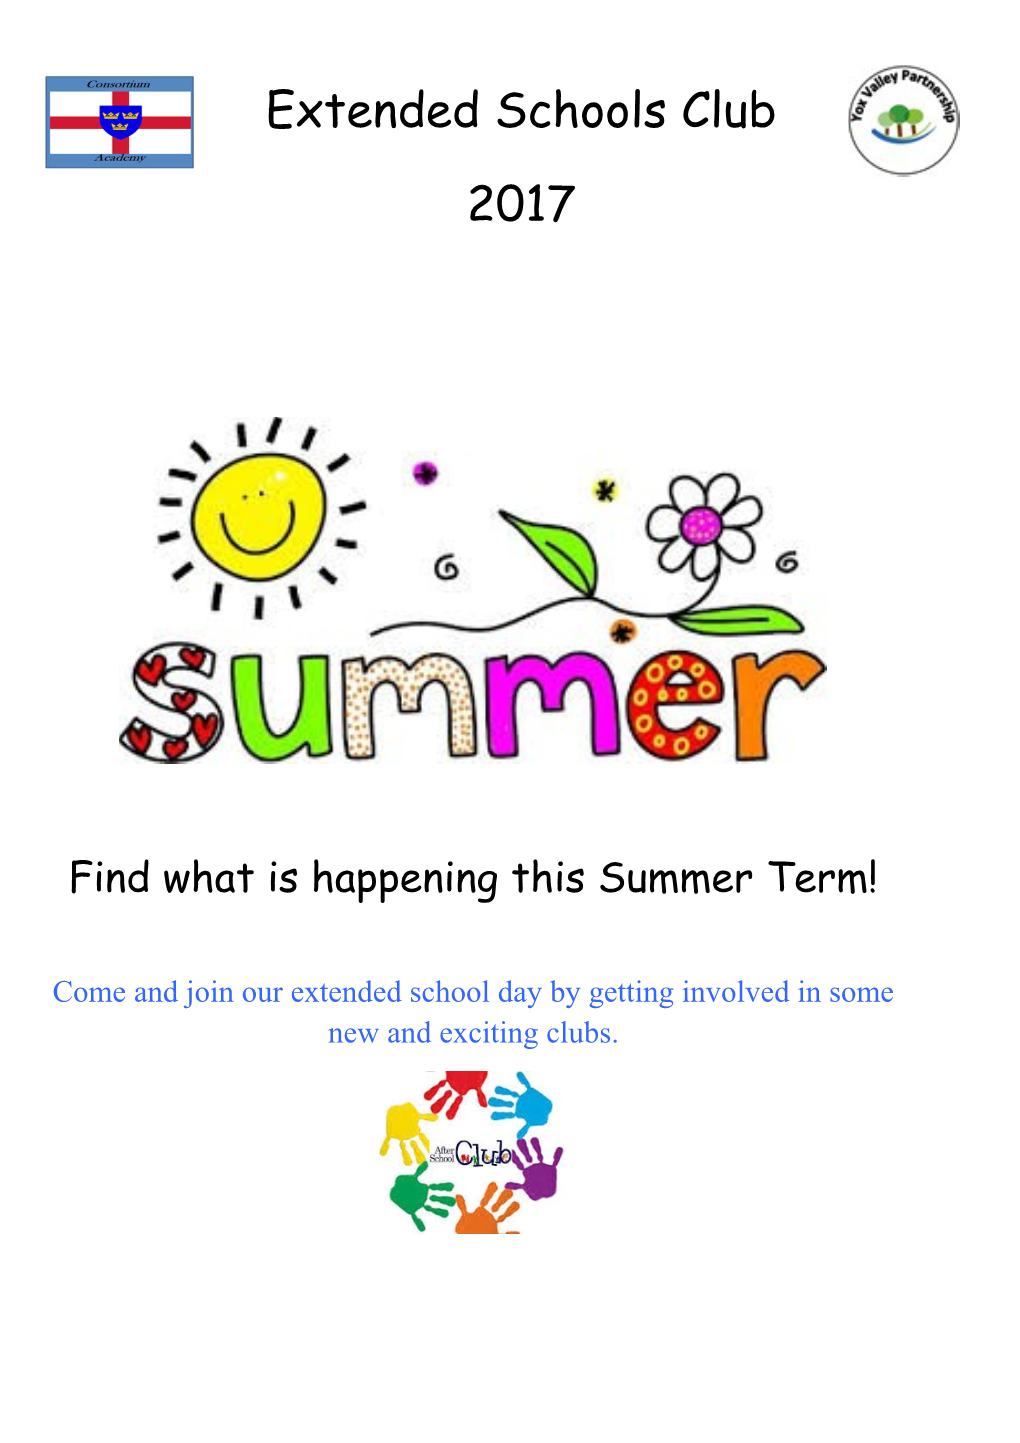 Find What Is Happening This Summer Term!